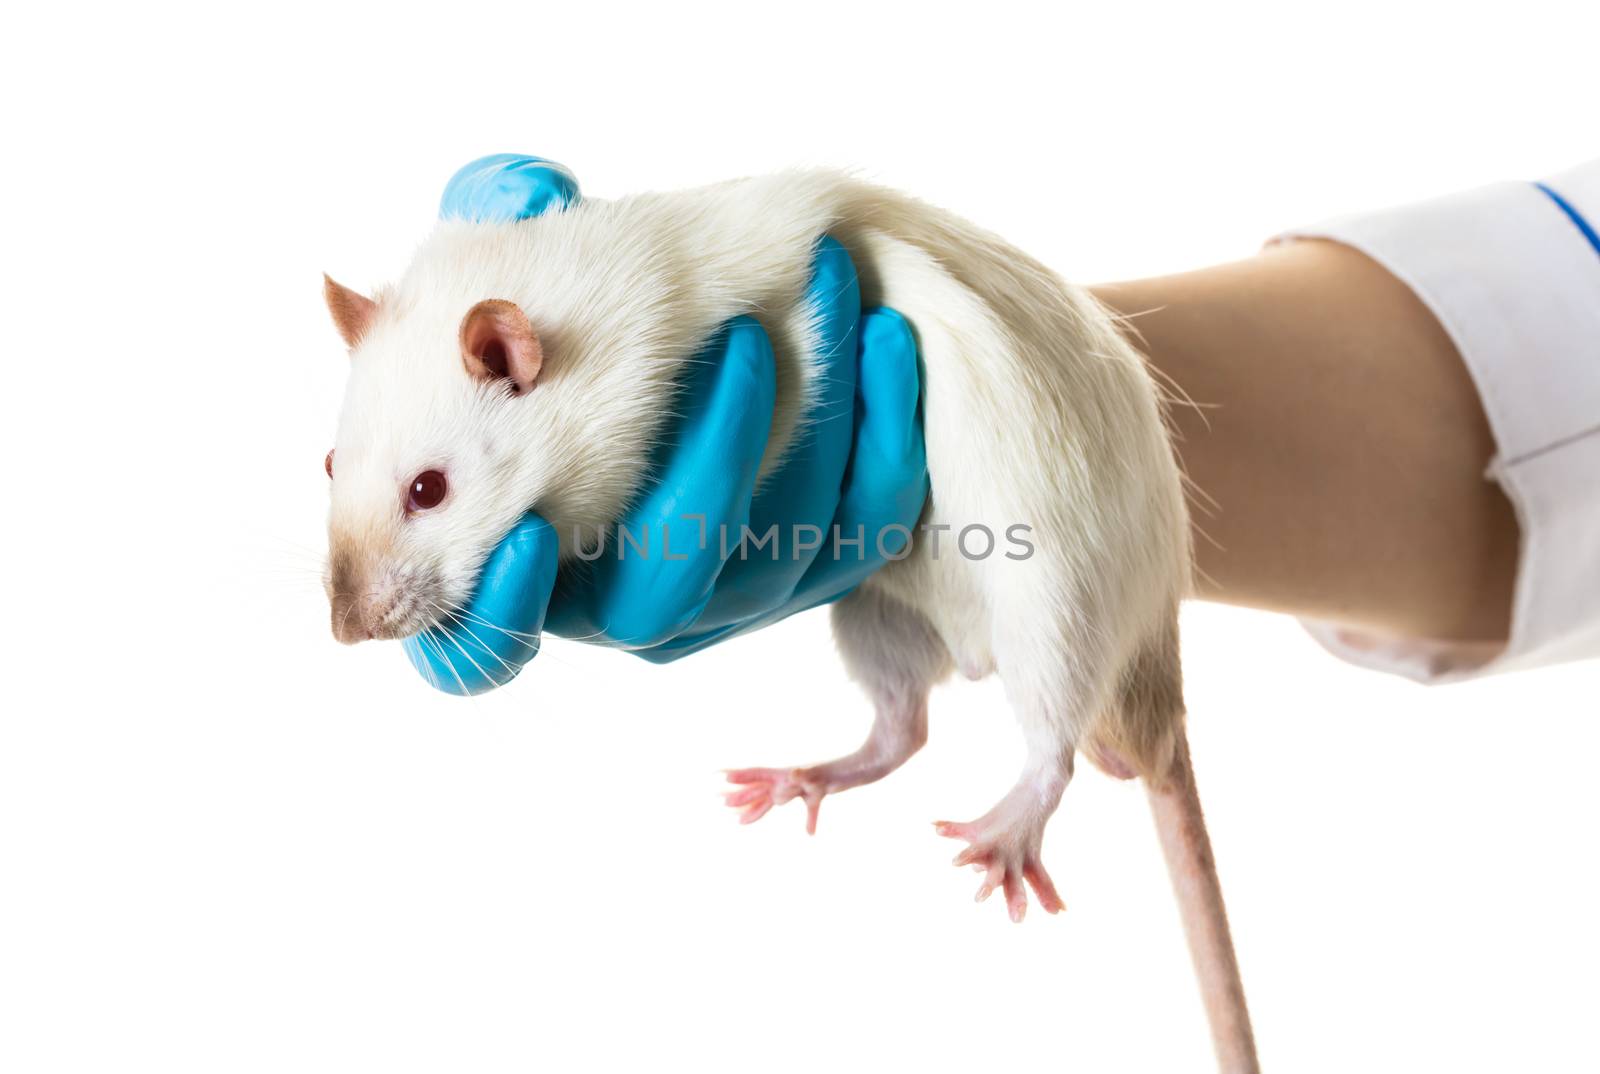 hands in medical gloves hold a rat on white background